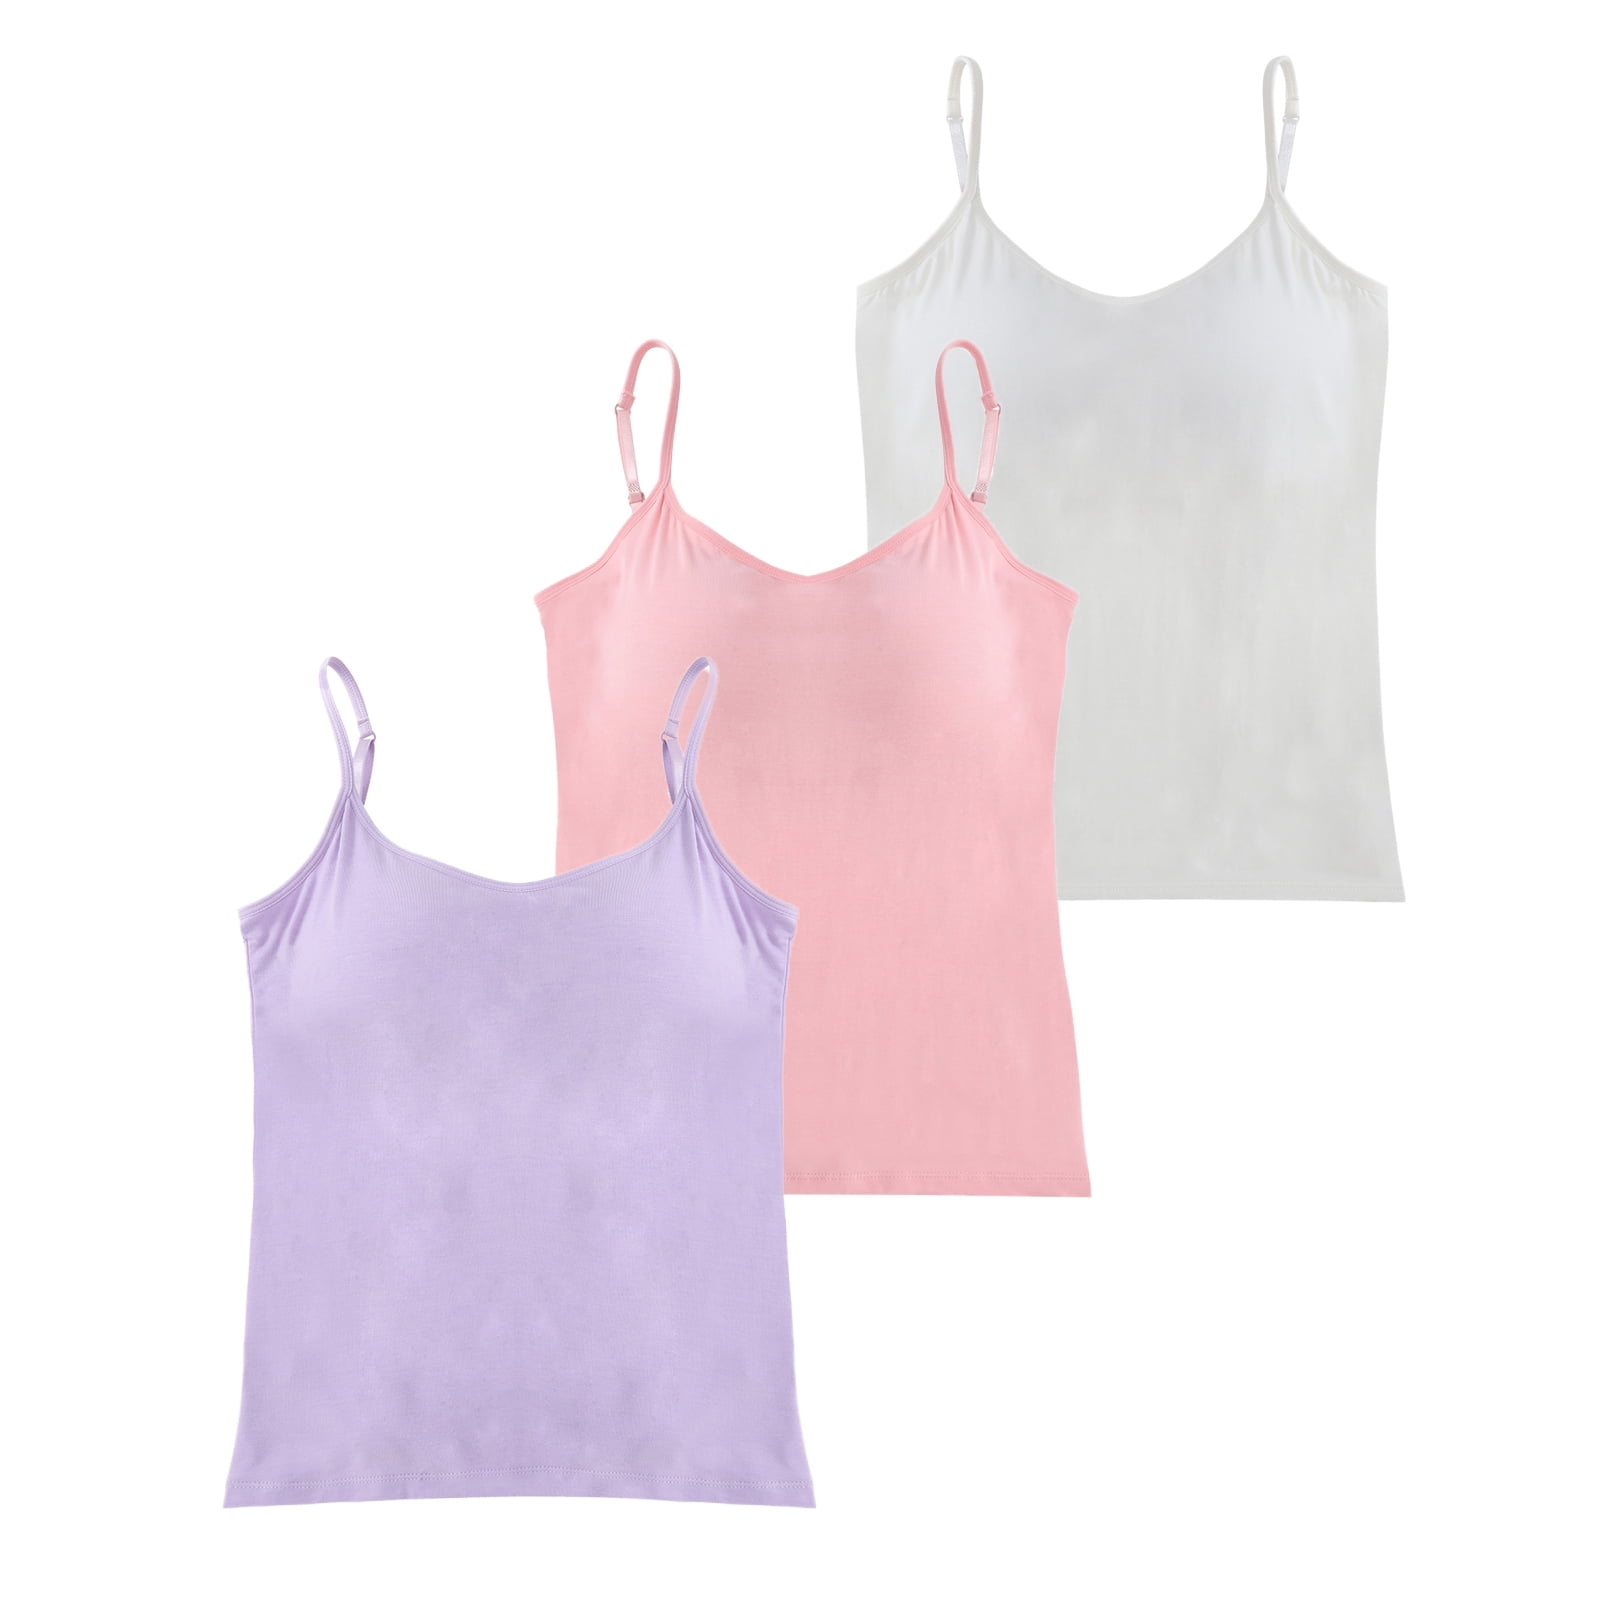 Baywell 3 Pack Women's Soft Modal Camisole with Built-in Bra Adjustable Spaghetti  Strap Tank Tops Padded Bra Basic Cami Yoga Tanks Tops, Non-Removable Pads 